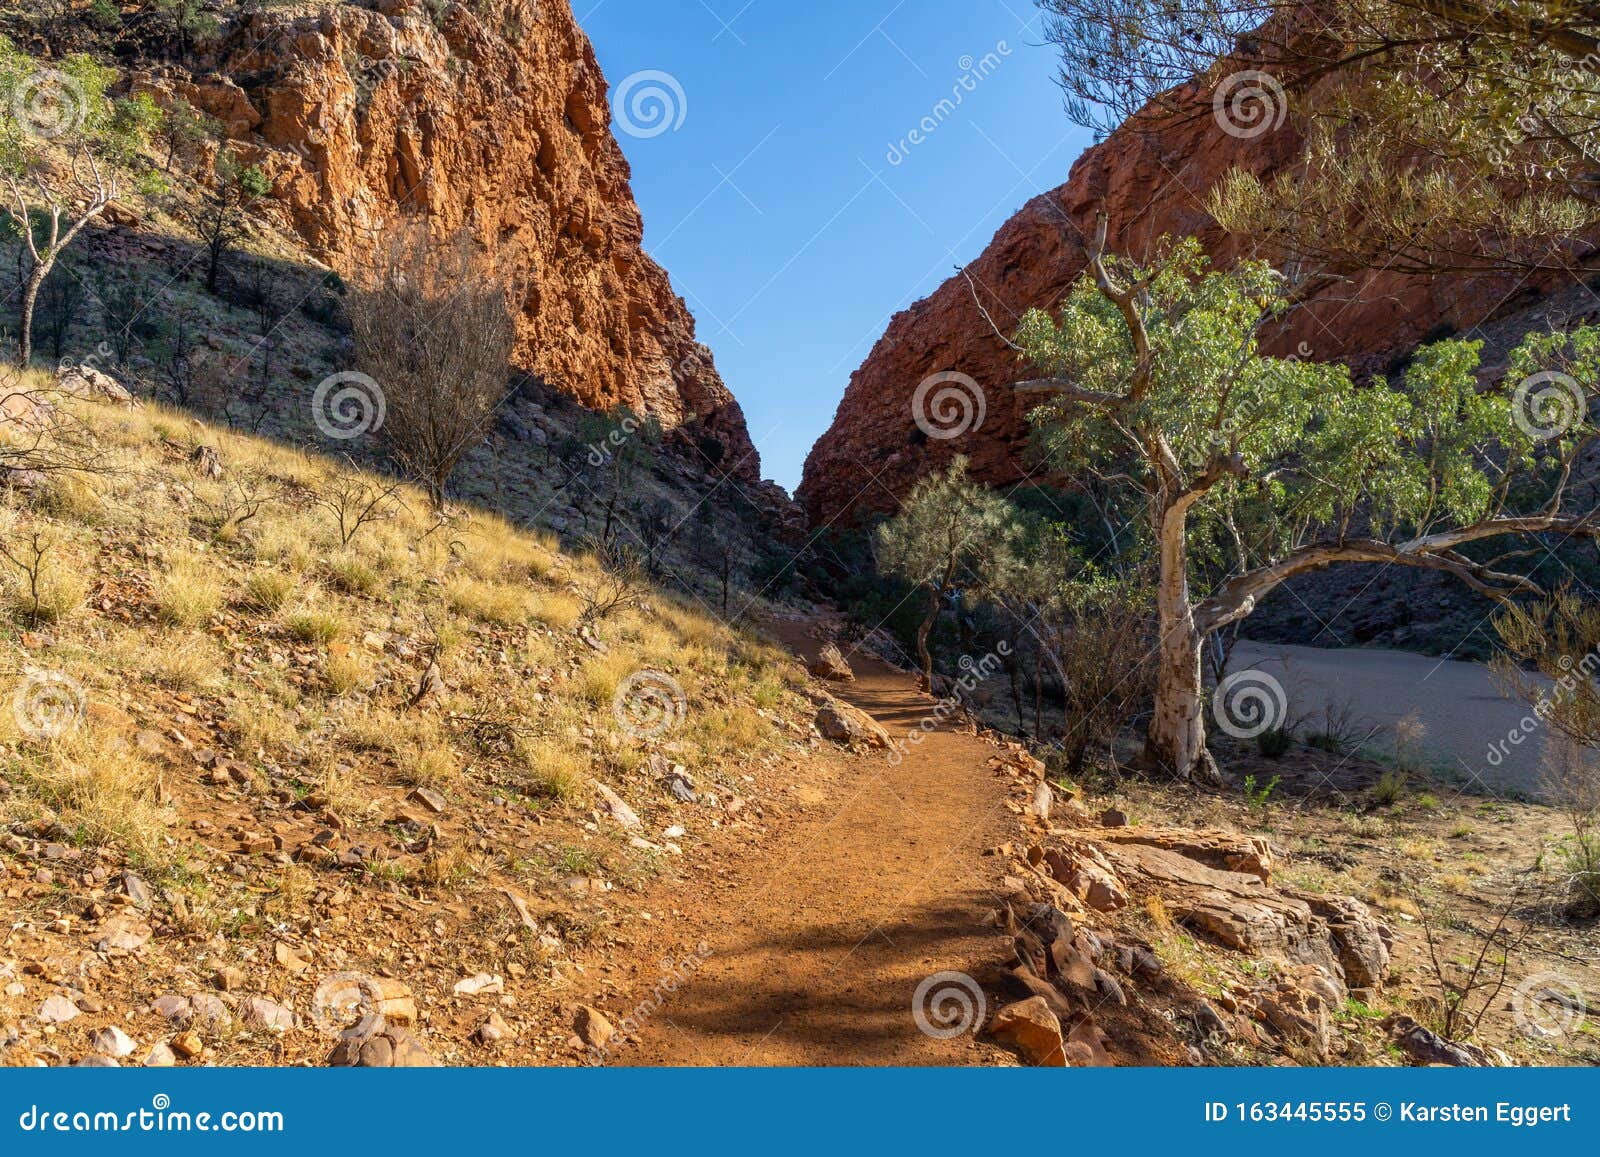 the australian outback there is a rugged rock formation called simpsons gab